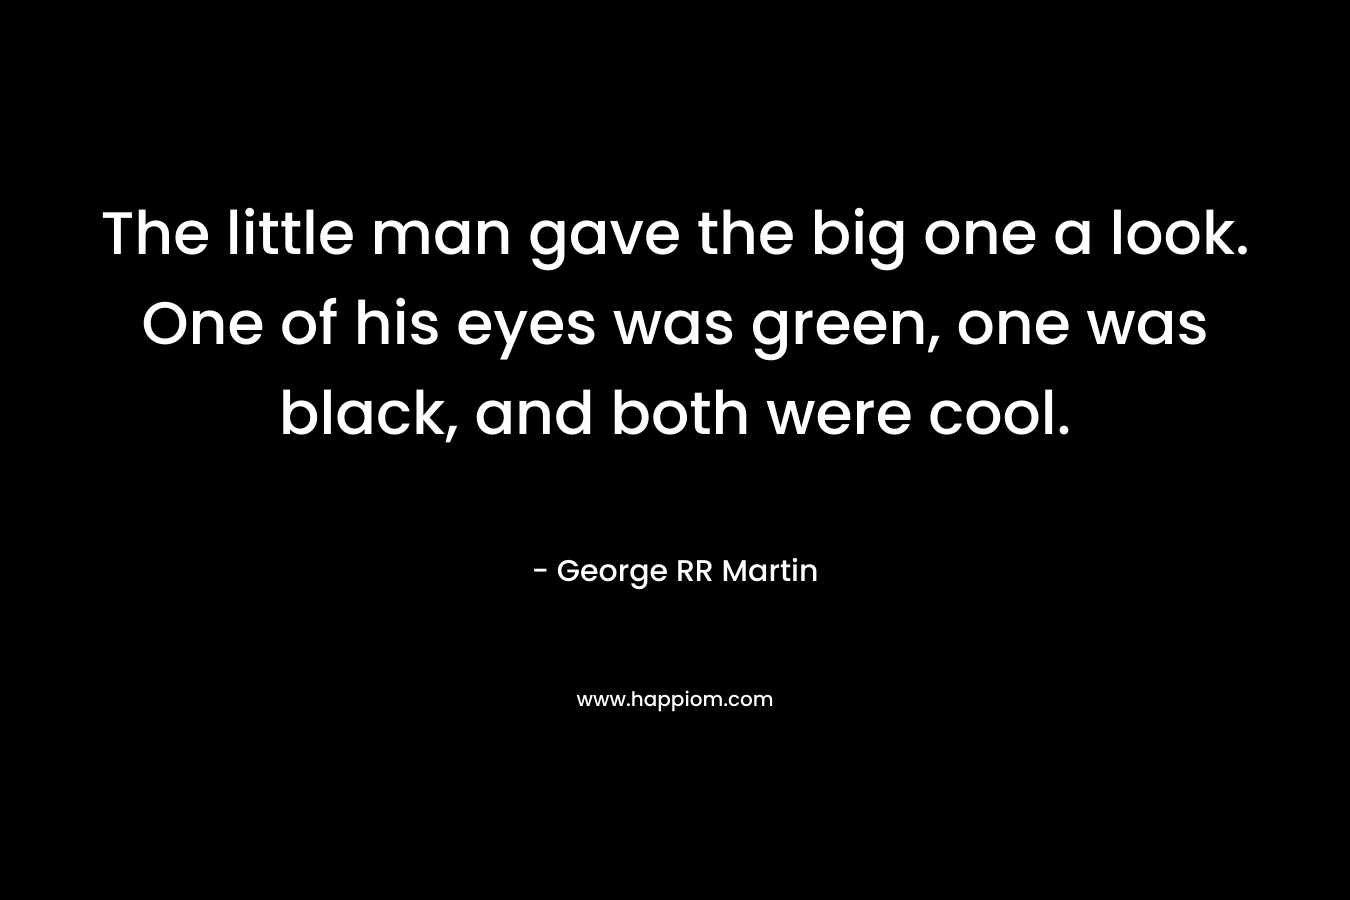 The little man gave the big one a look. One of his eyes was green, one was black, and both were cool. – George RR Martin